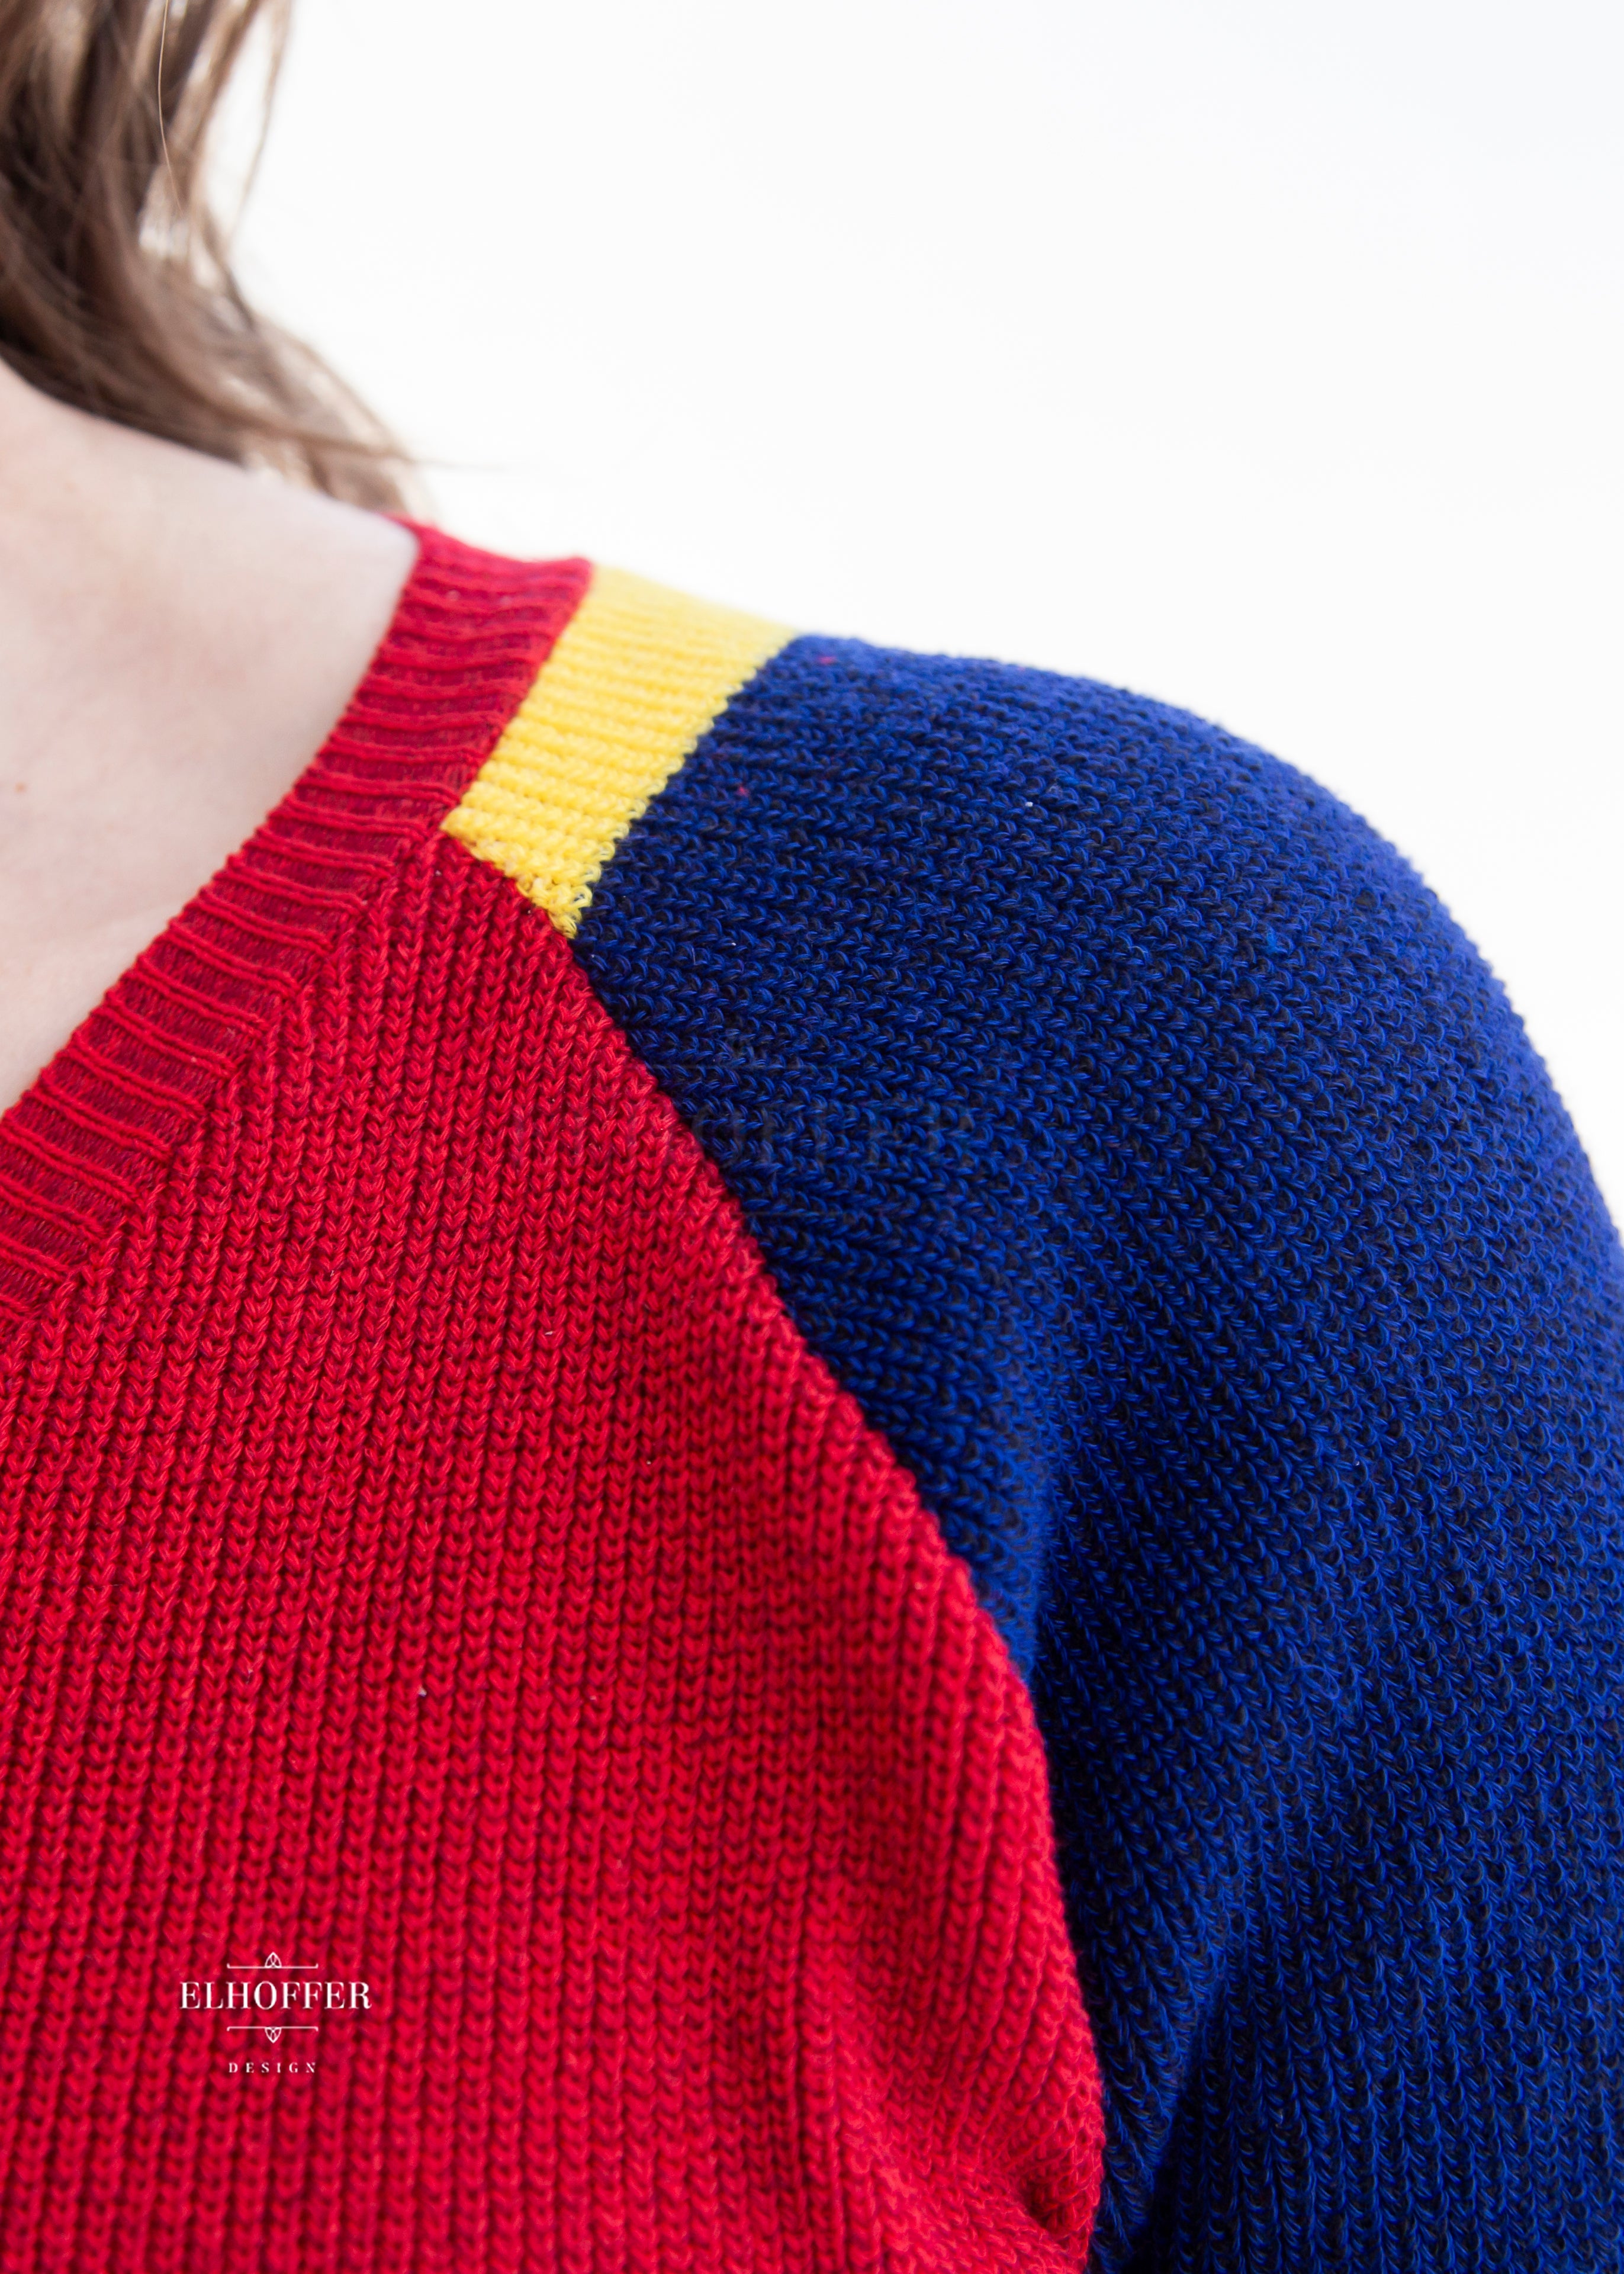 Close up of the knit texture